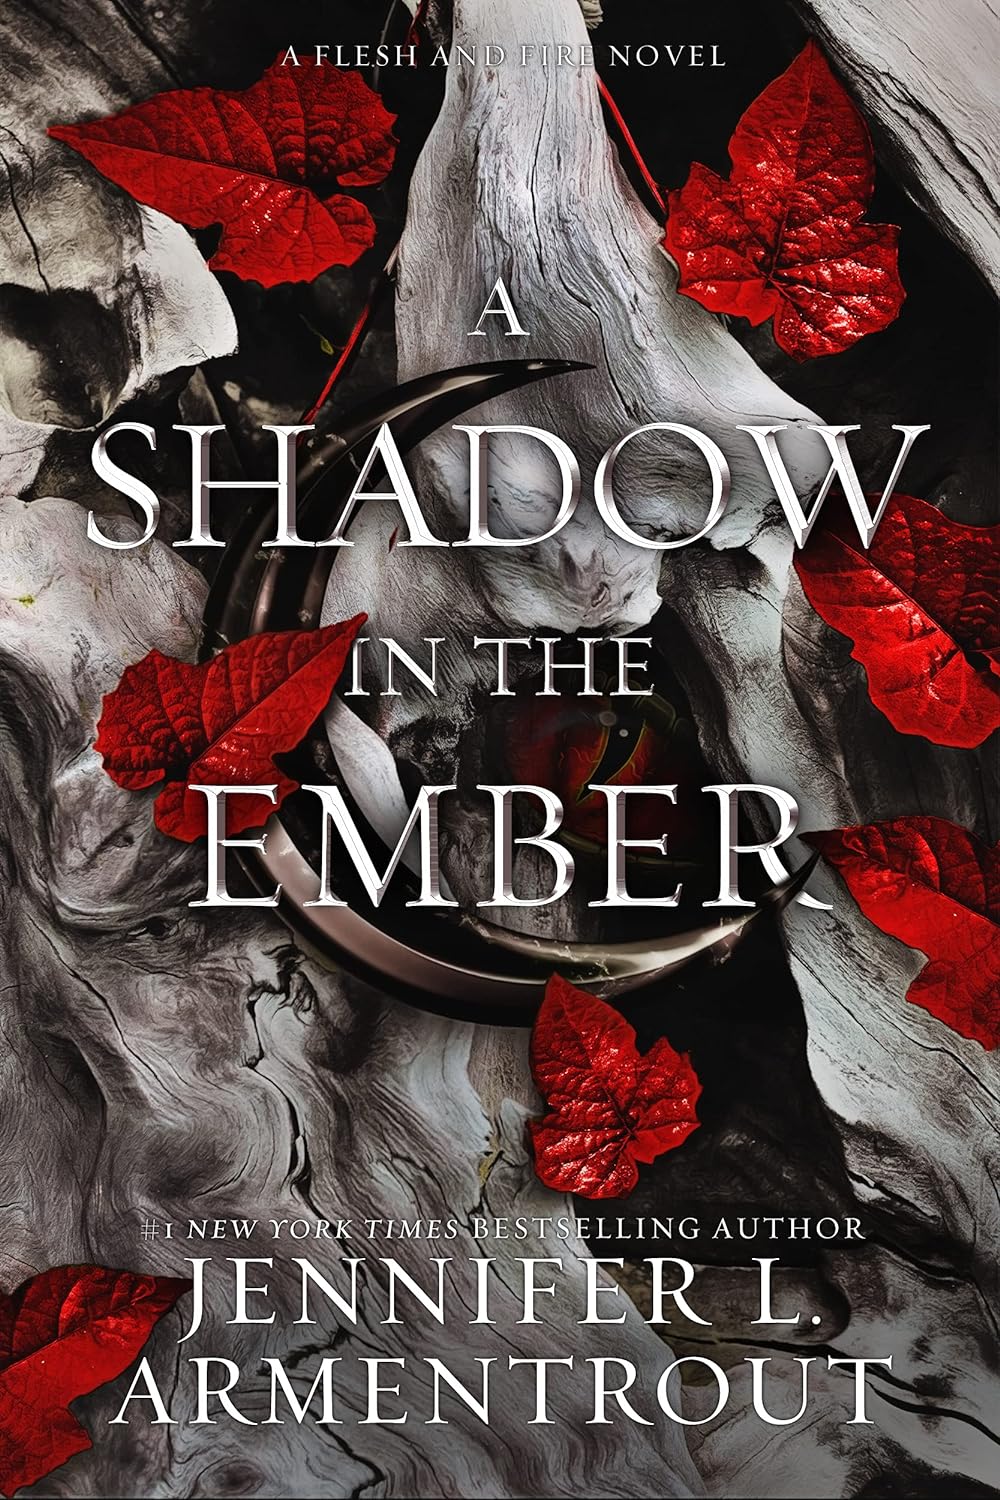 The Shadow In The Ember From The Flesh And Fire Series By Jennifer Armentrout